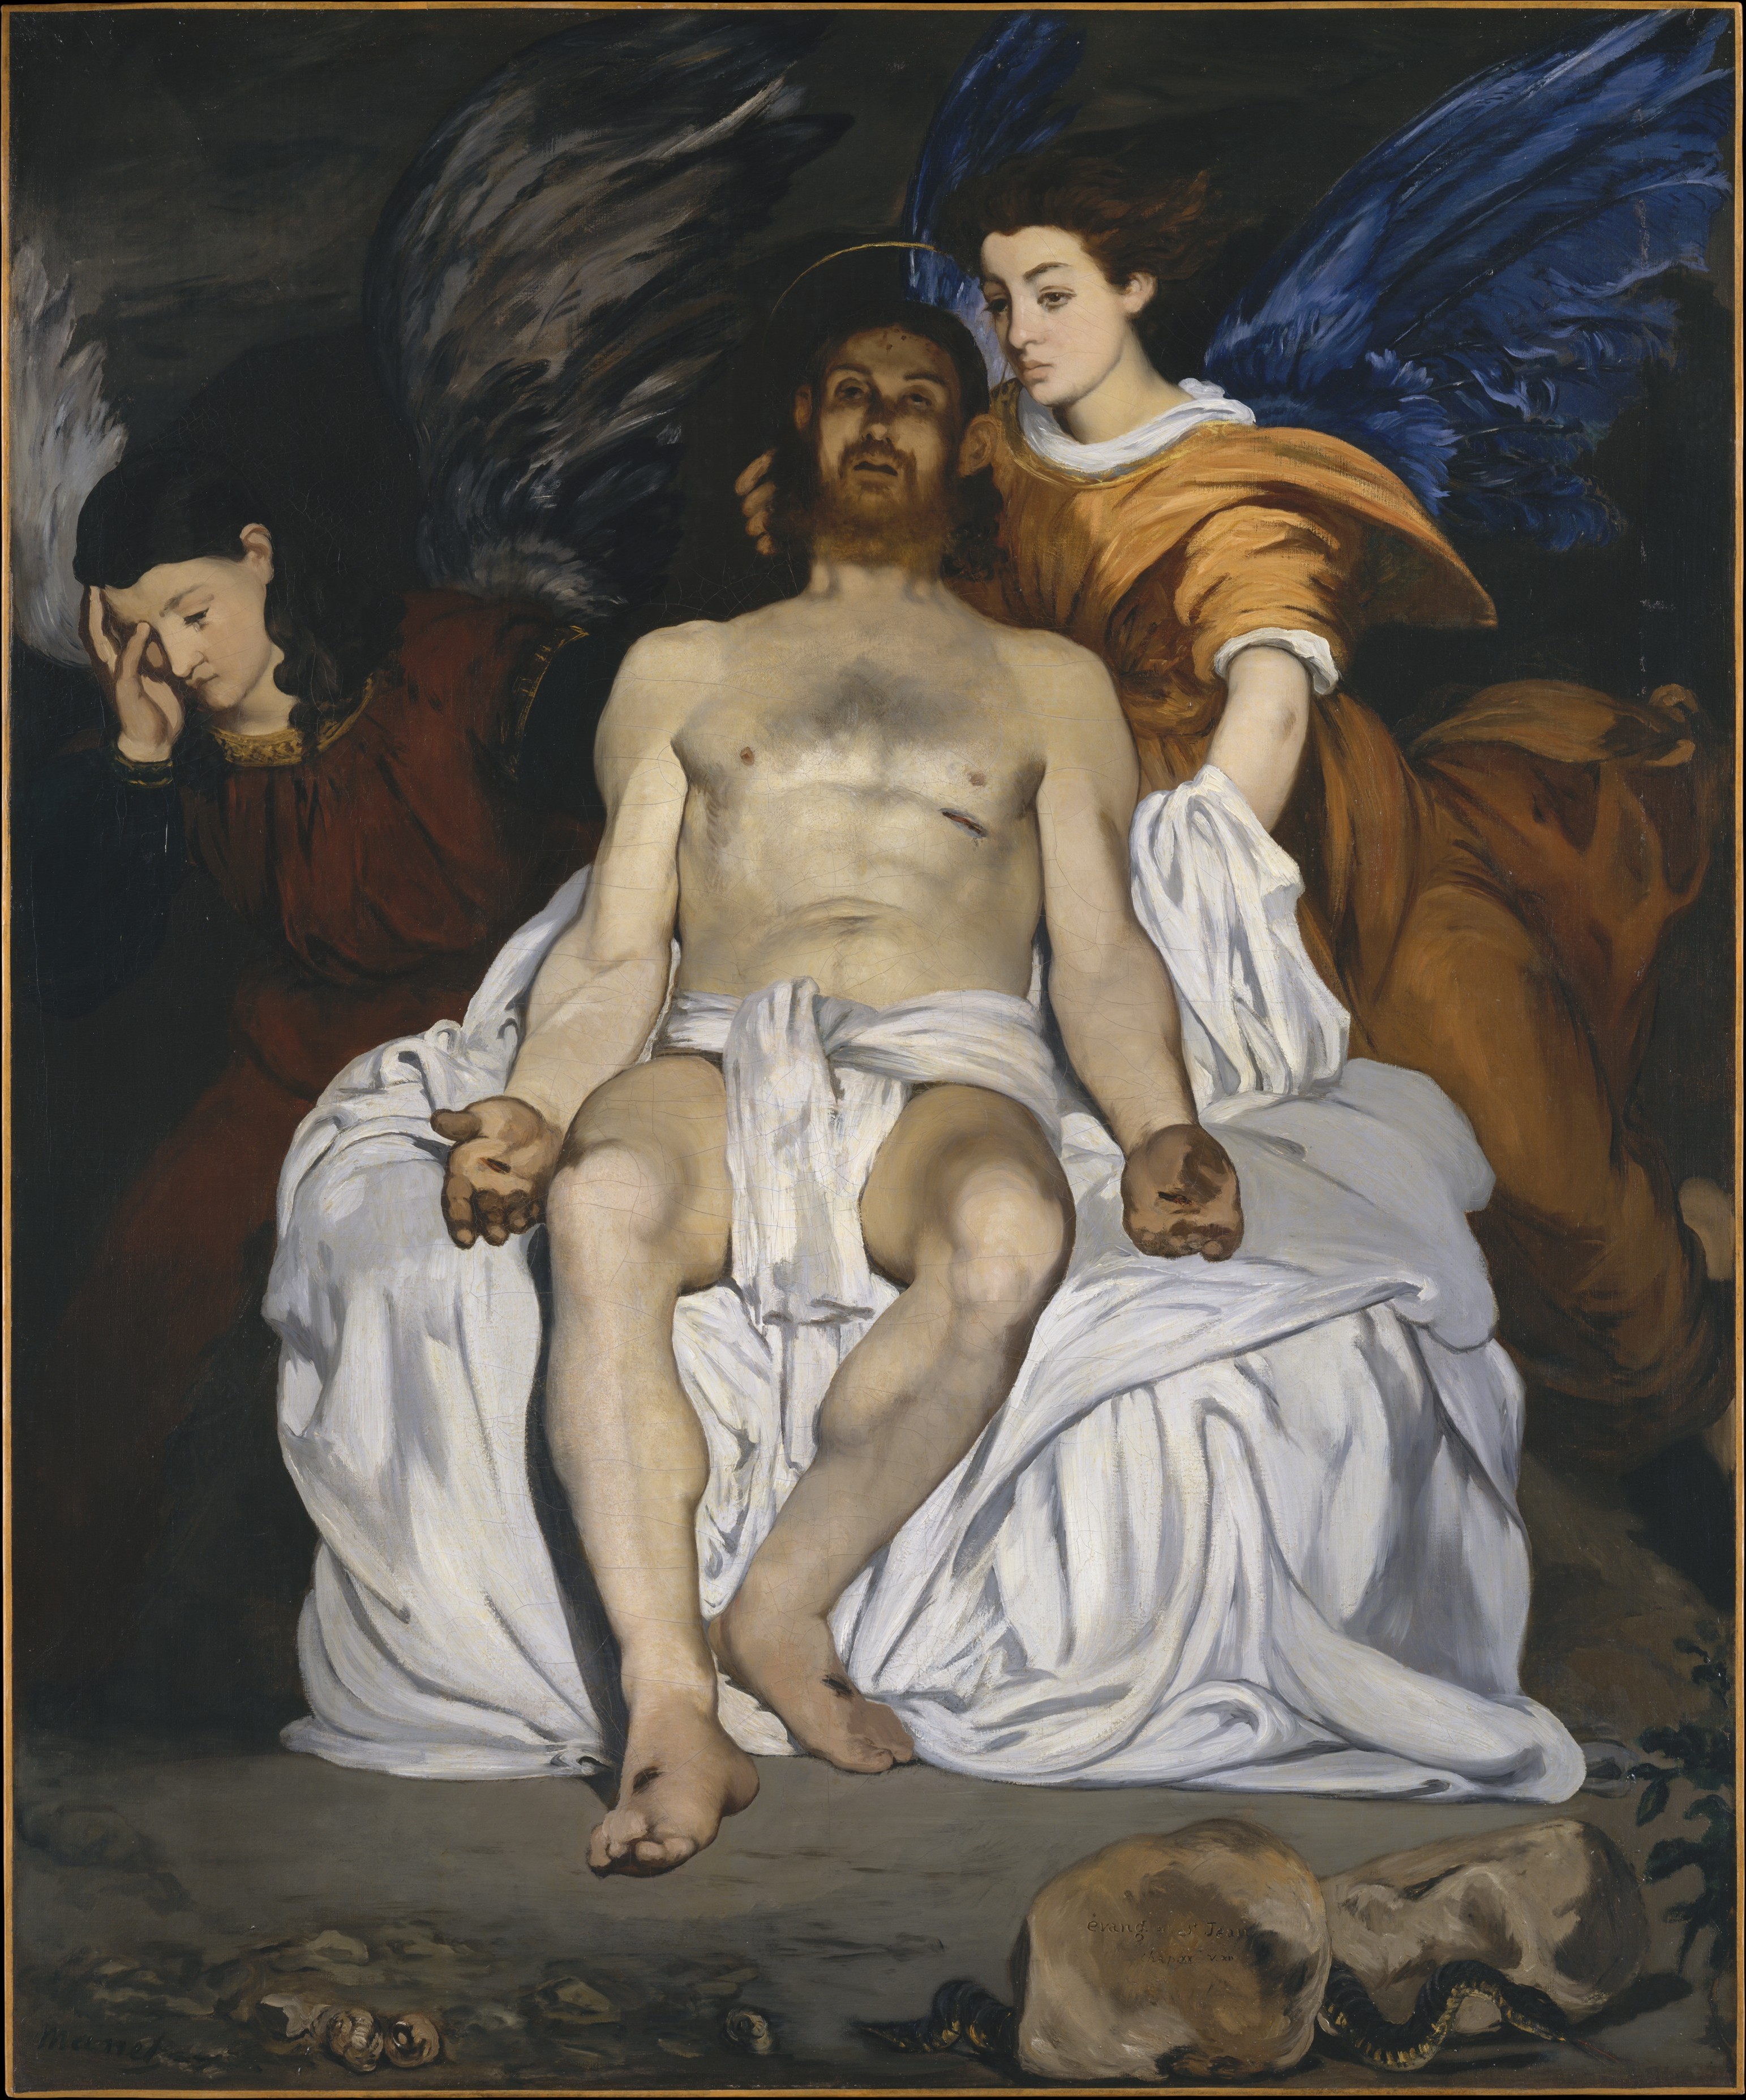 The Dead Christ with Angels by Édouard Manet - 1864 - 179.4 x 149.9 cm Metropolitan Museum of Art